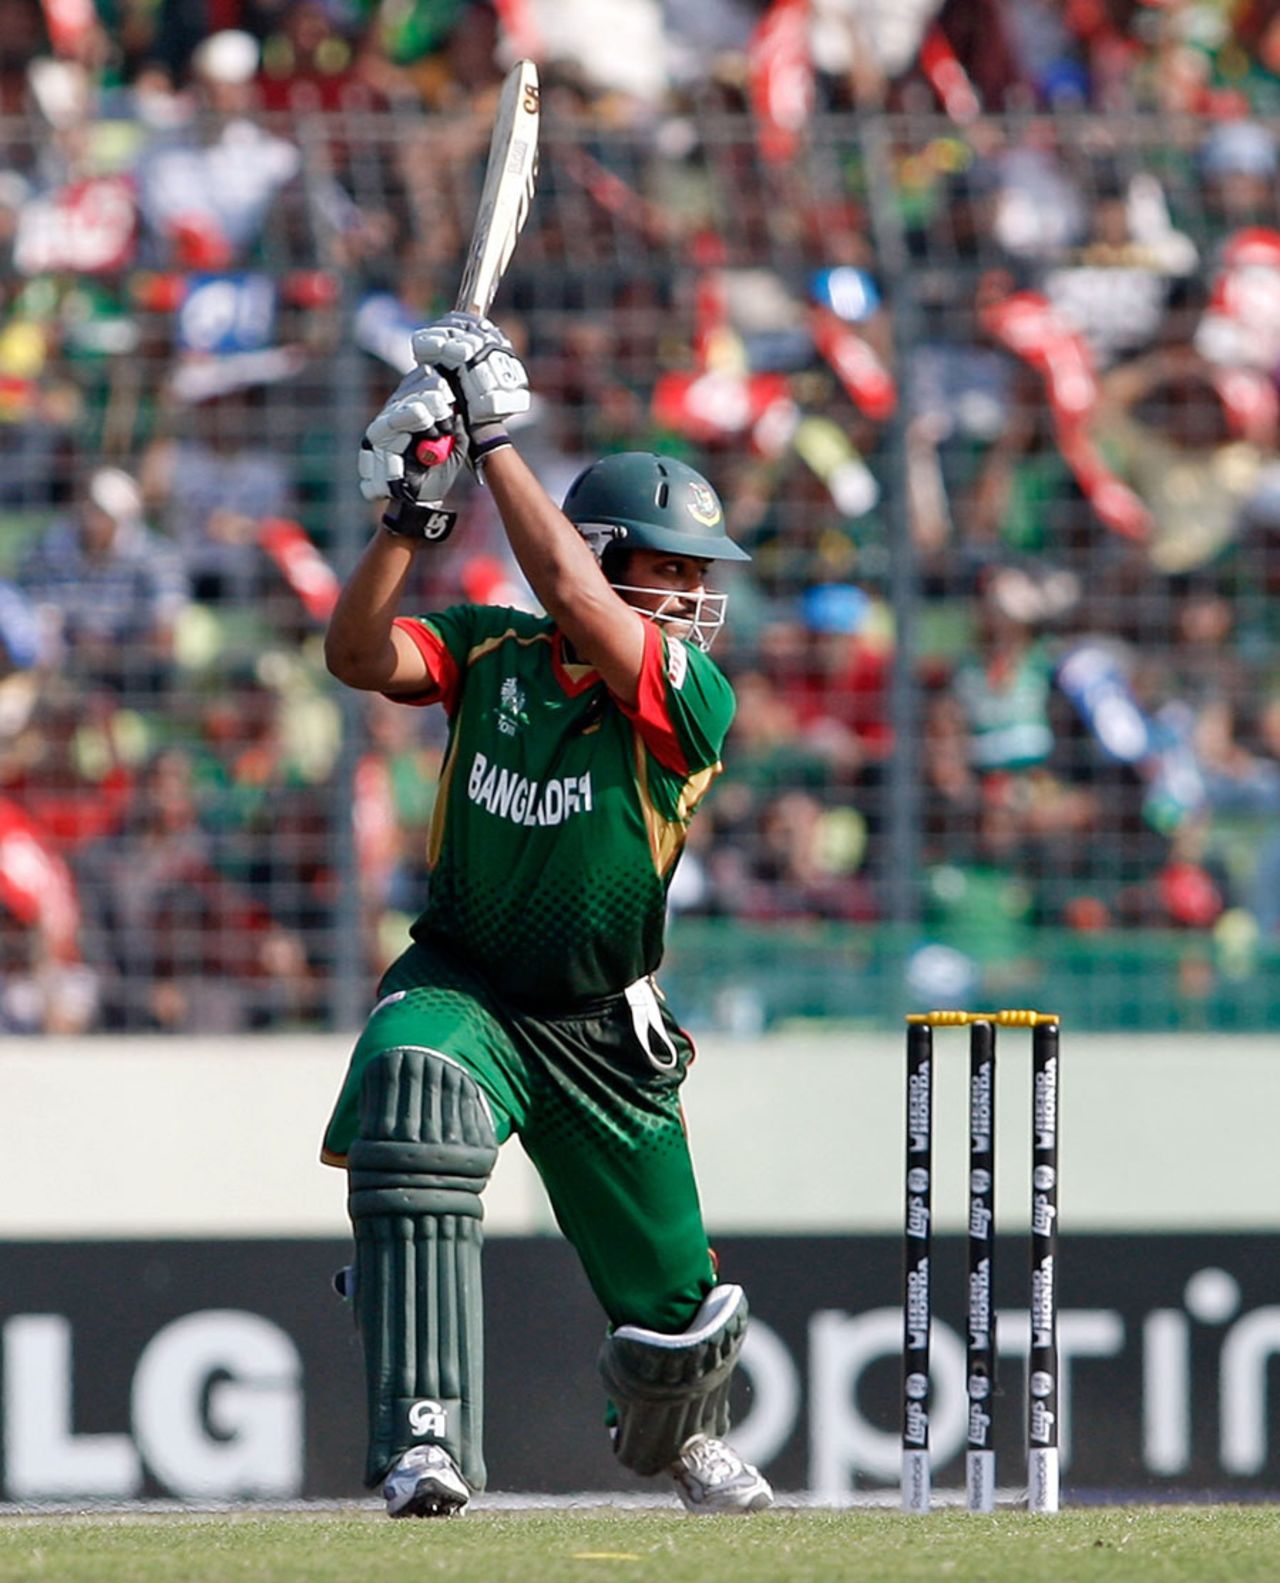 Tamim Iqbal brought the crowd alive with a blazing start to Bangladesh's innings, Bangladesh v Ireland, World Cup 2011, Mirpur, February 25, 2010
